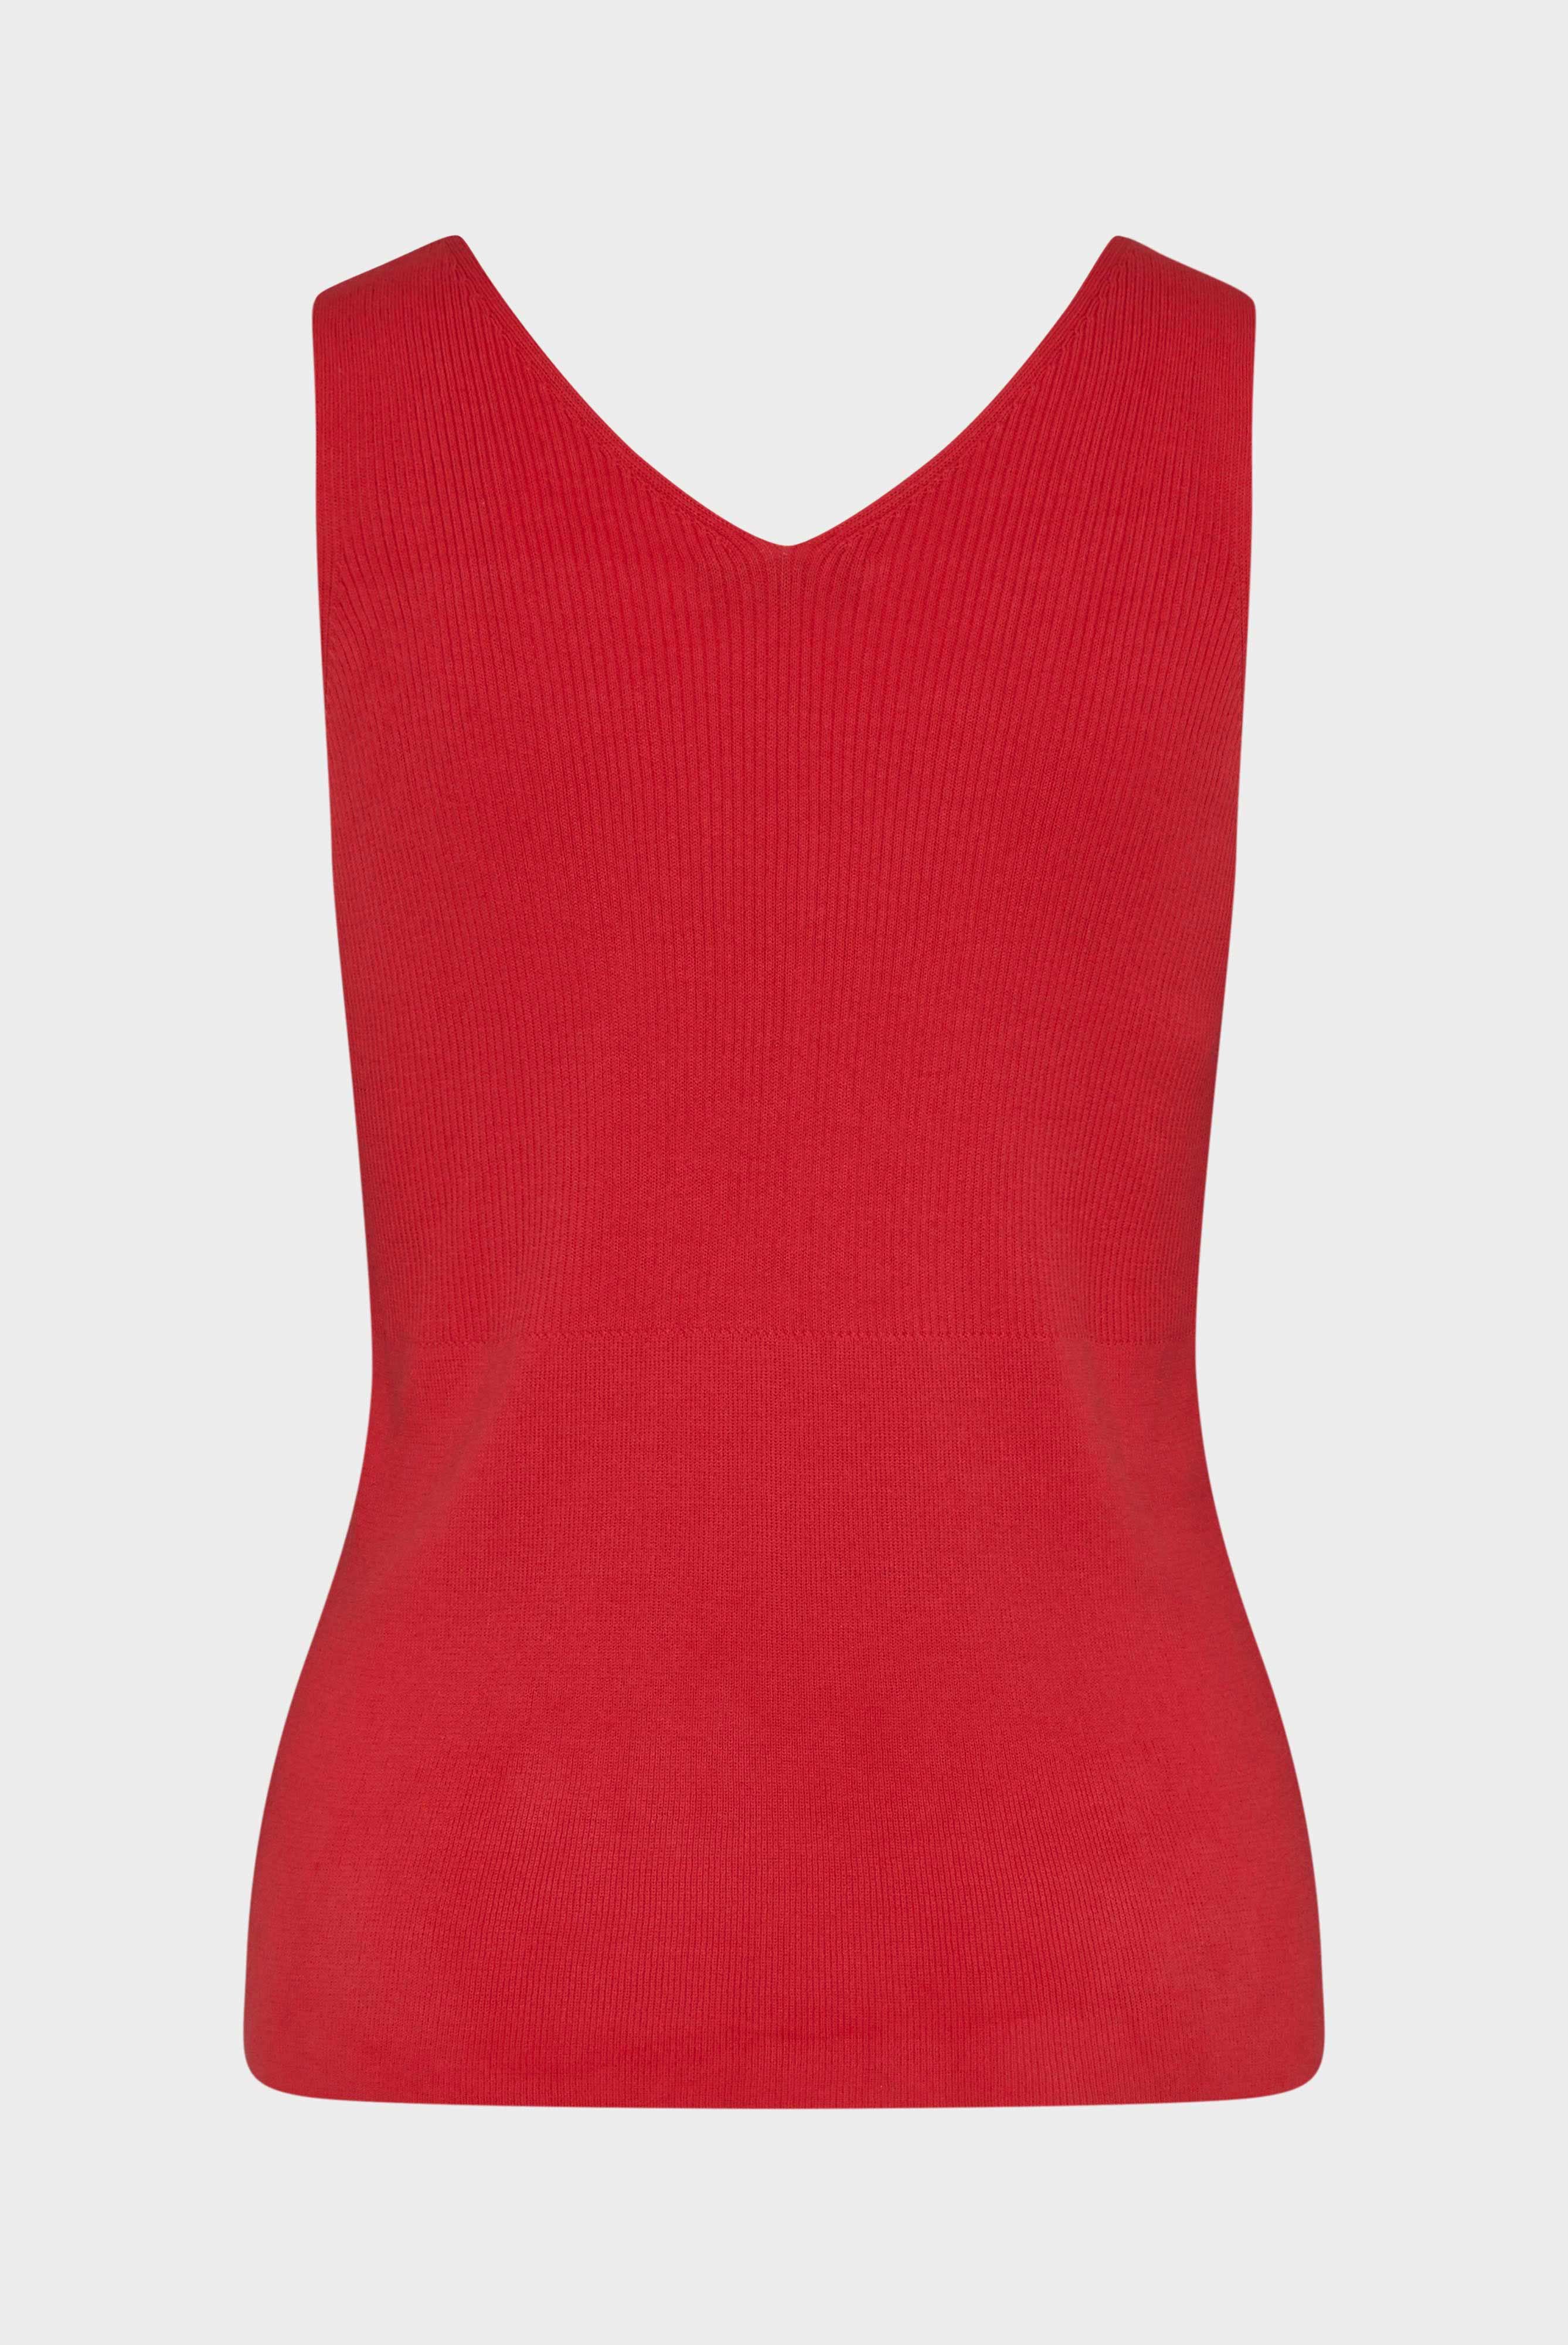 Tops & T-Shirts+Slim fit cotton tank top rot/rose+09.9966..S00192.540.M